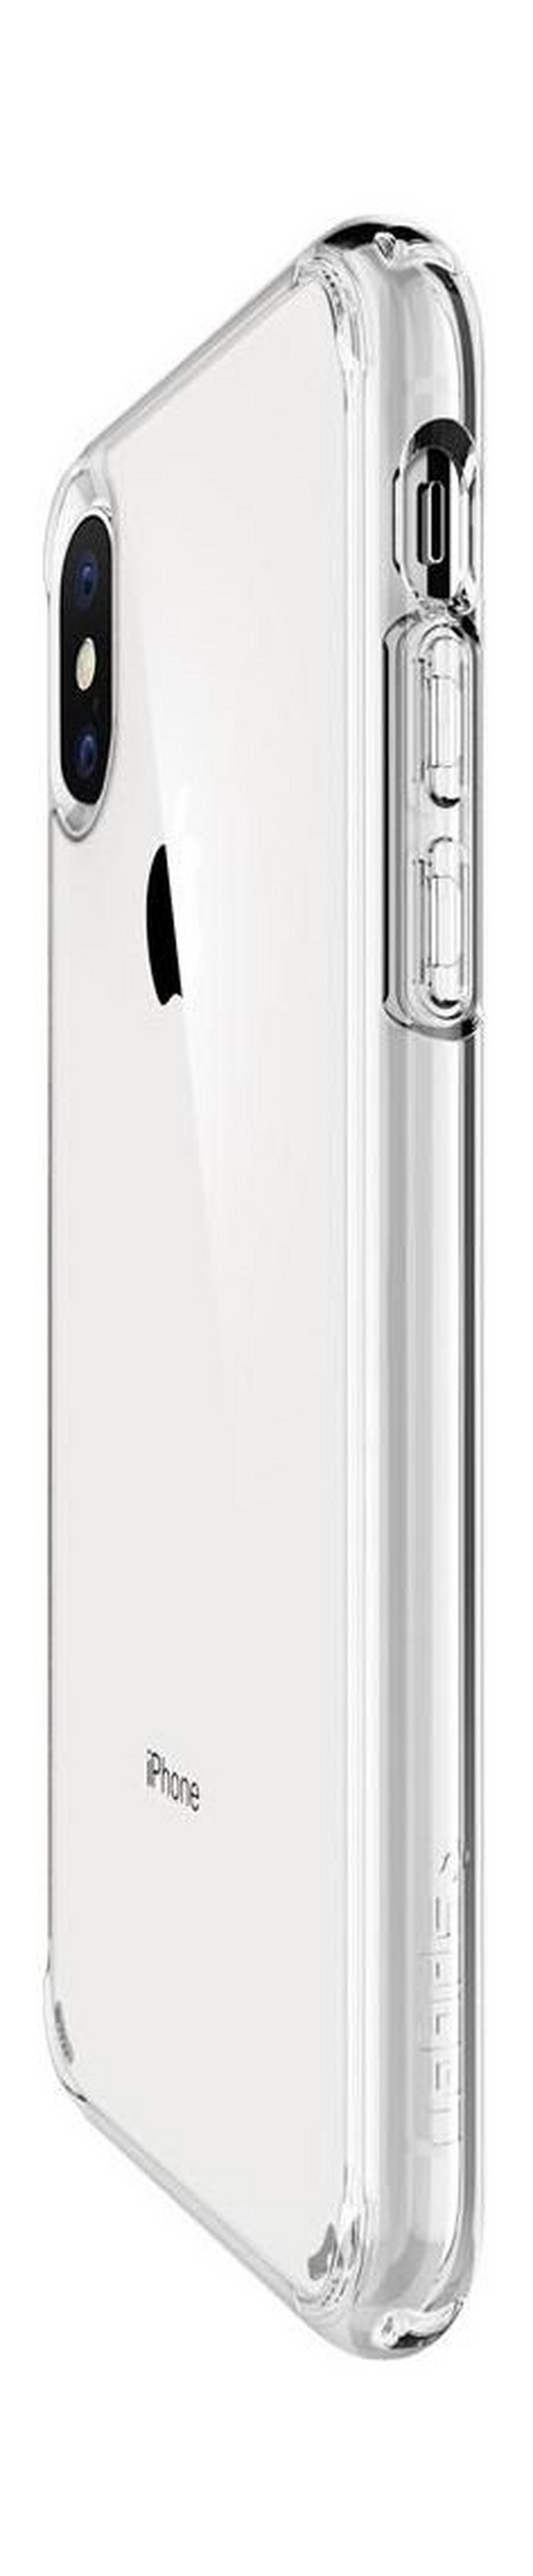 Spigen Ultra Hybrid Crystal Case For iPhone XS Max (065CS25127) - Clear